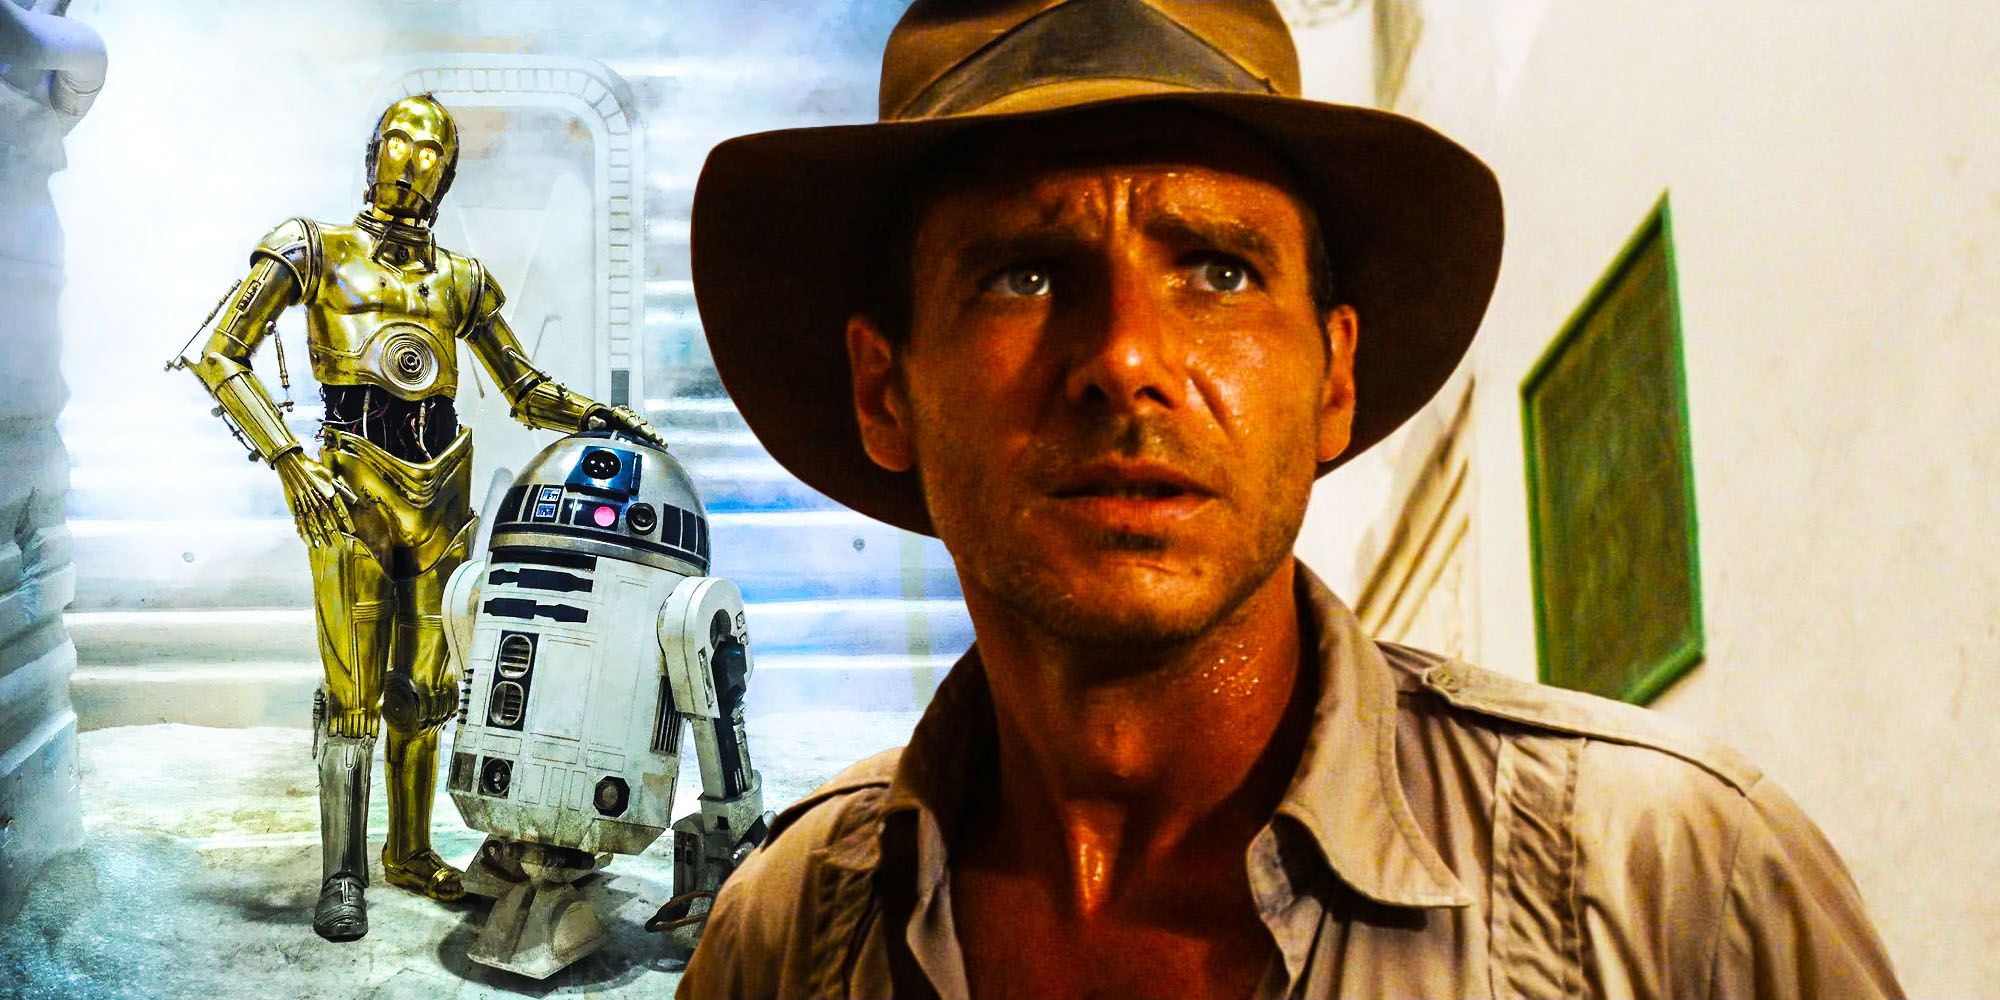 Indiana jones raiders of the lost ark Star Wars Easter Egg R2D2 C3PO